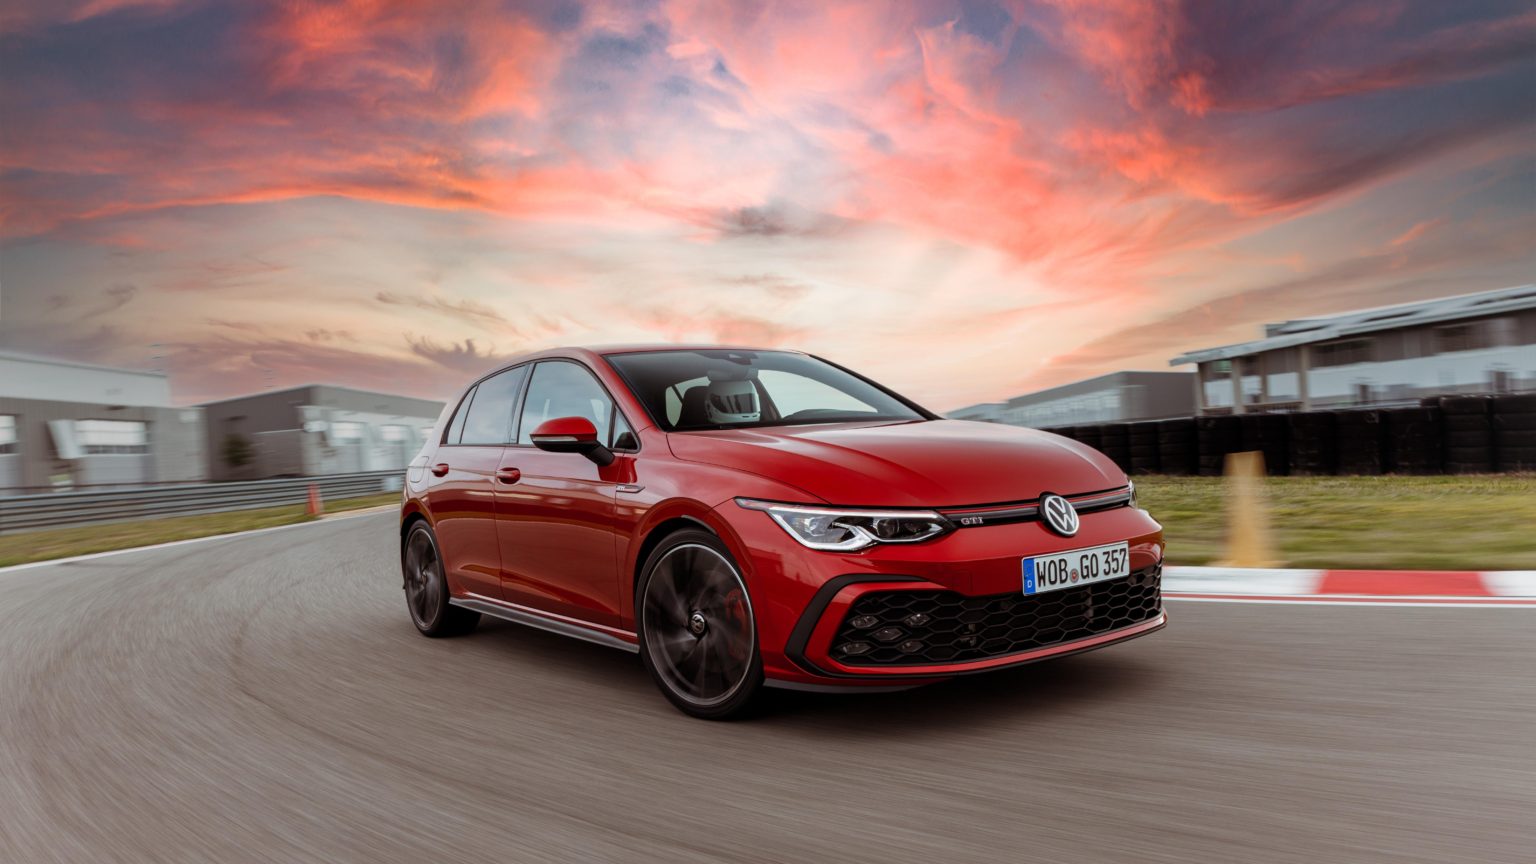 Improvements to the GTI's handling and steering should make it even faster in the curves.